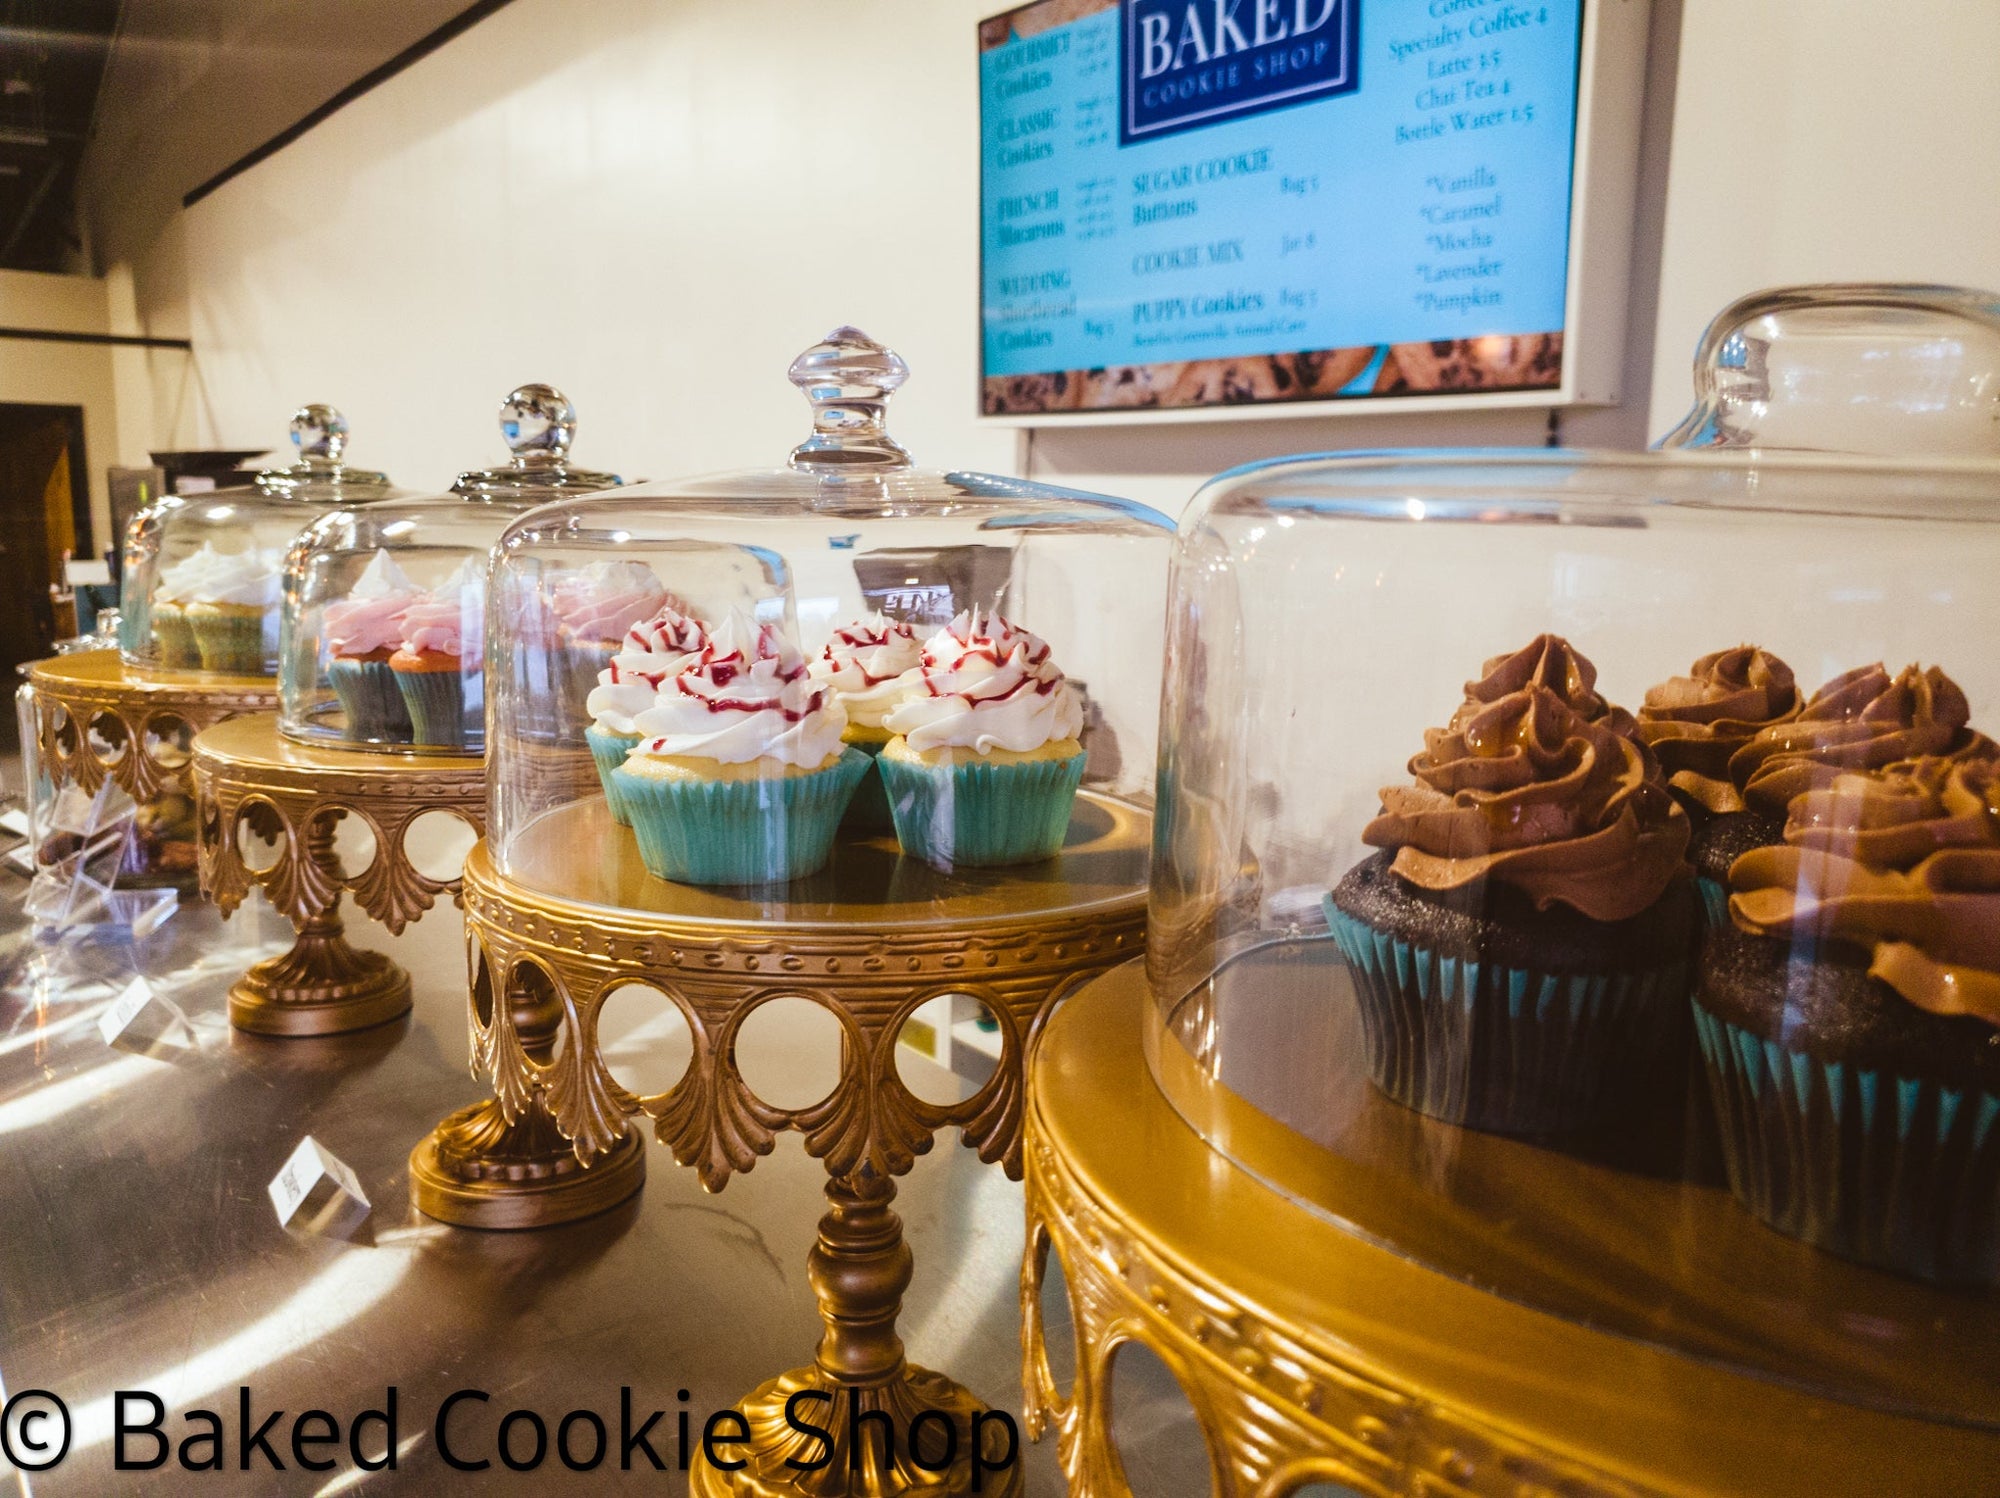 Cupcakes in Greenville, SC | Baked Cookie Shop